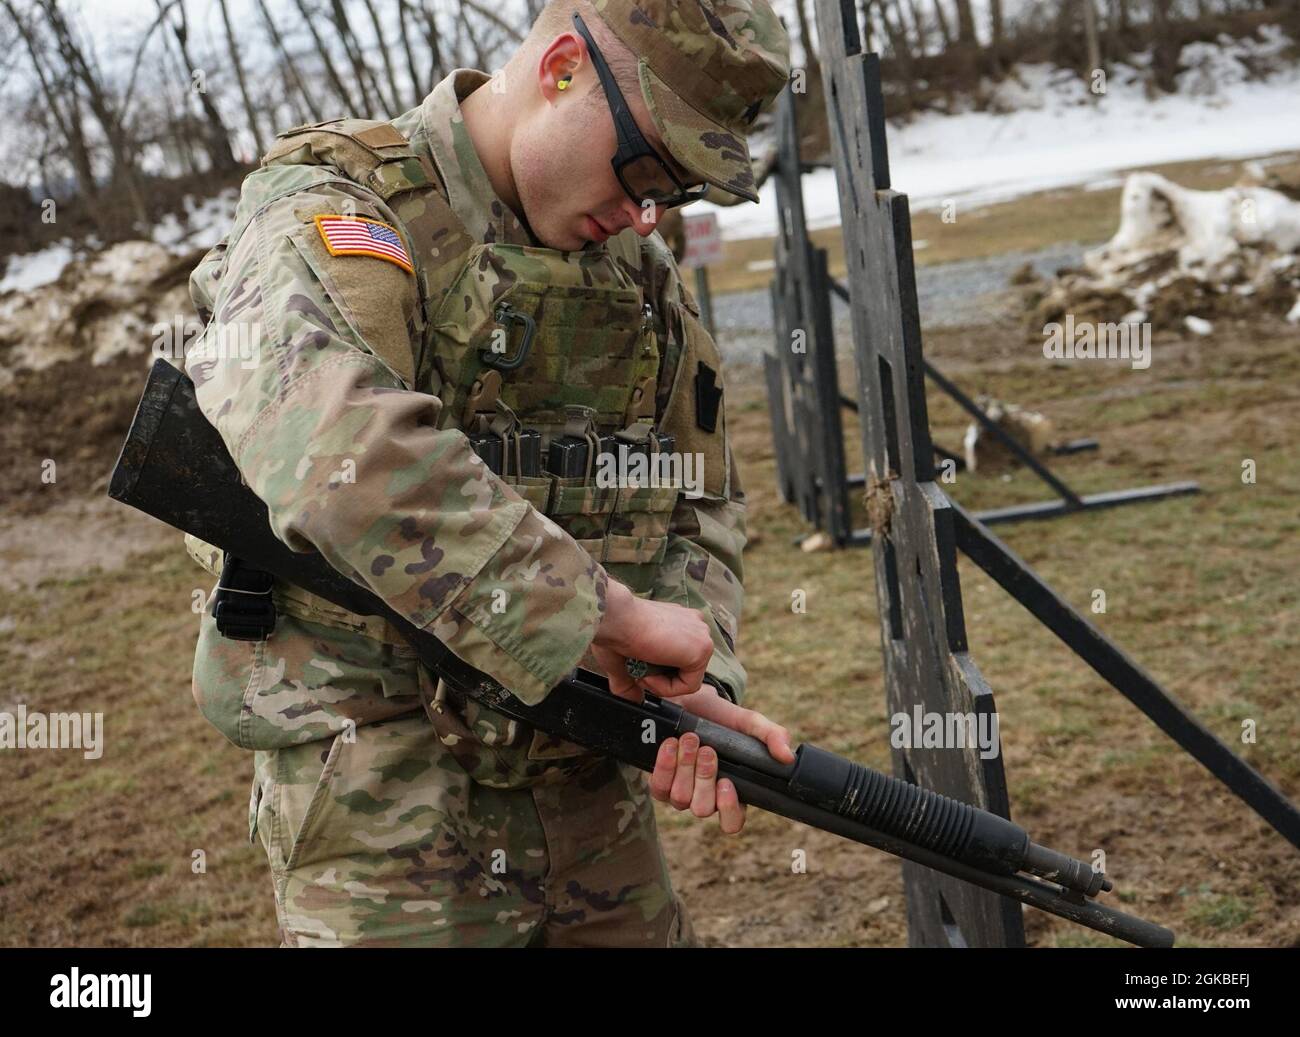 Sgt. Alexander Heber, a Soldier from the 56th Stryker Brigade Combat Team, 28th Infantry Division, loads a 12-gauge shotgun shell into the M500 shotgun during M500 shotgun qualifications part of the Pennsylvania Army National Guard's Best Warrior Competition on March 4, 2021, at Fort Indiantown Gap, Pa. The range portion of the competition consisted of qualification with the M4 carbine, M17 pistol, and M500 shotgun. Stock Photo